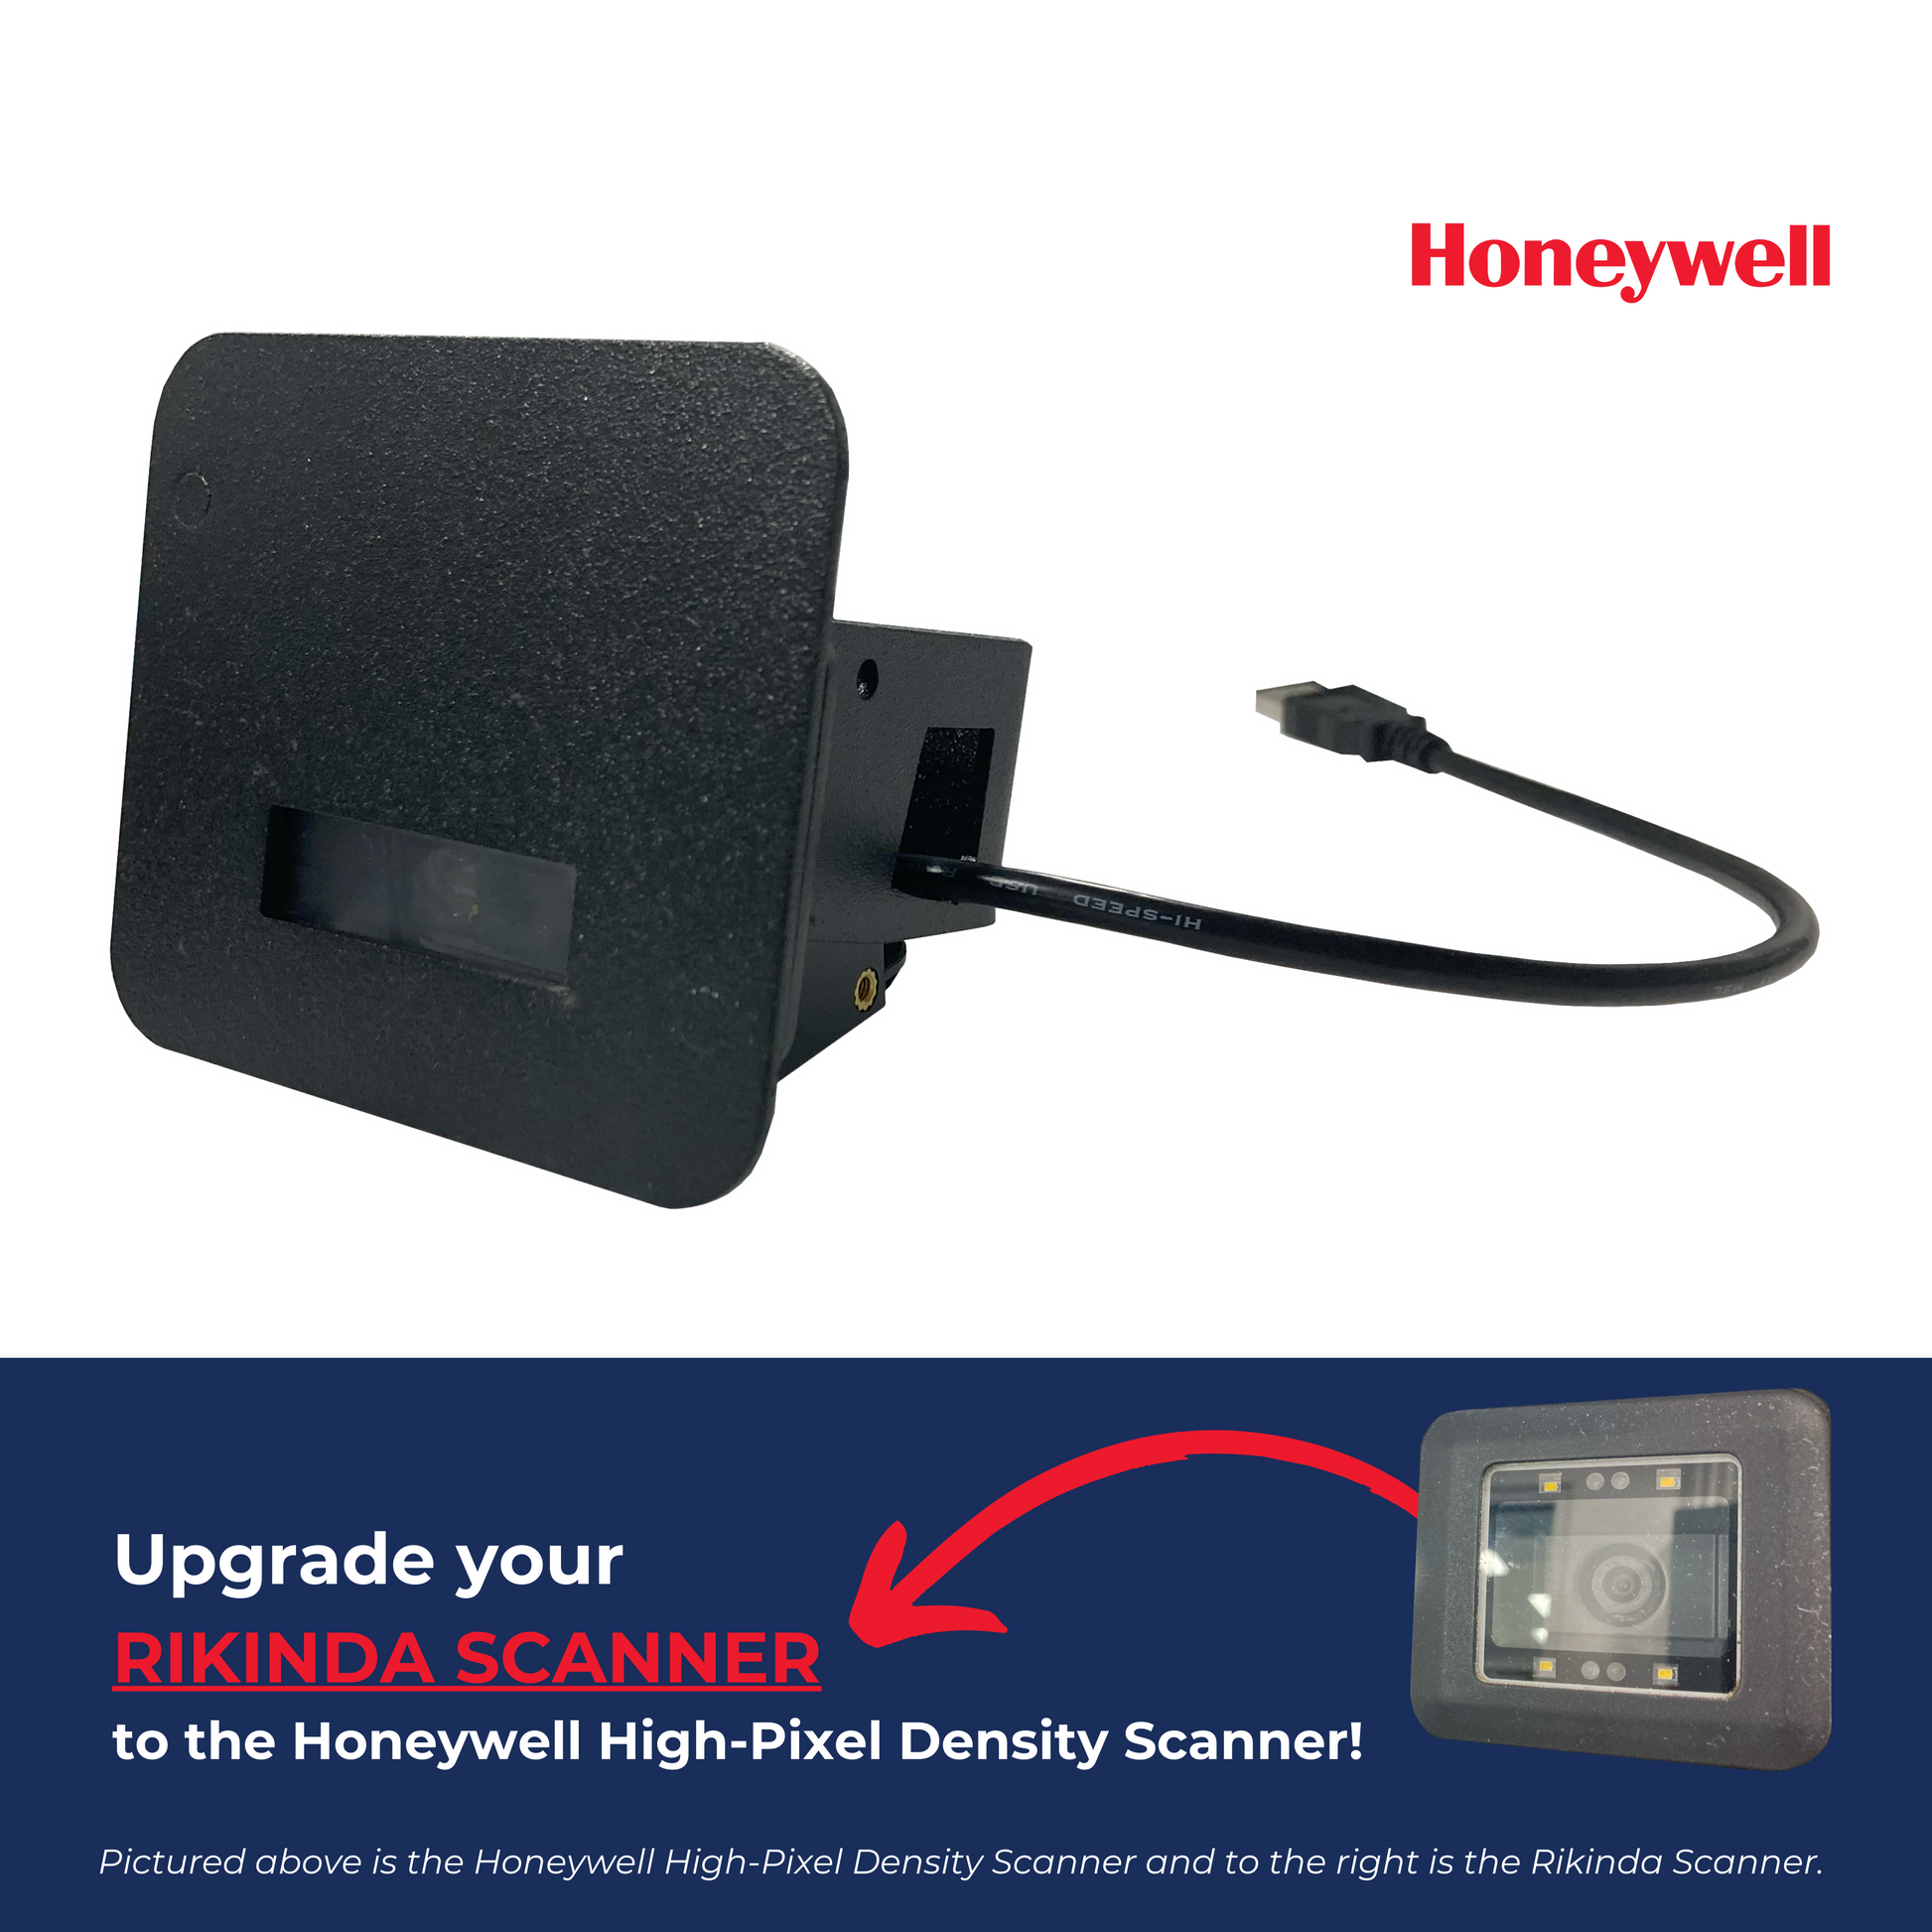 Sold by Miele Manufacturing. This Honeywell Scanner is an upgraded scanner that is used to update the scanner for the eCash TRT models. This scanner specifically replaces the Rakinda Scanner that was featured in the original eCash models. 